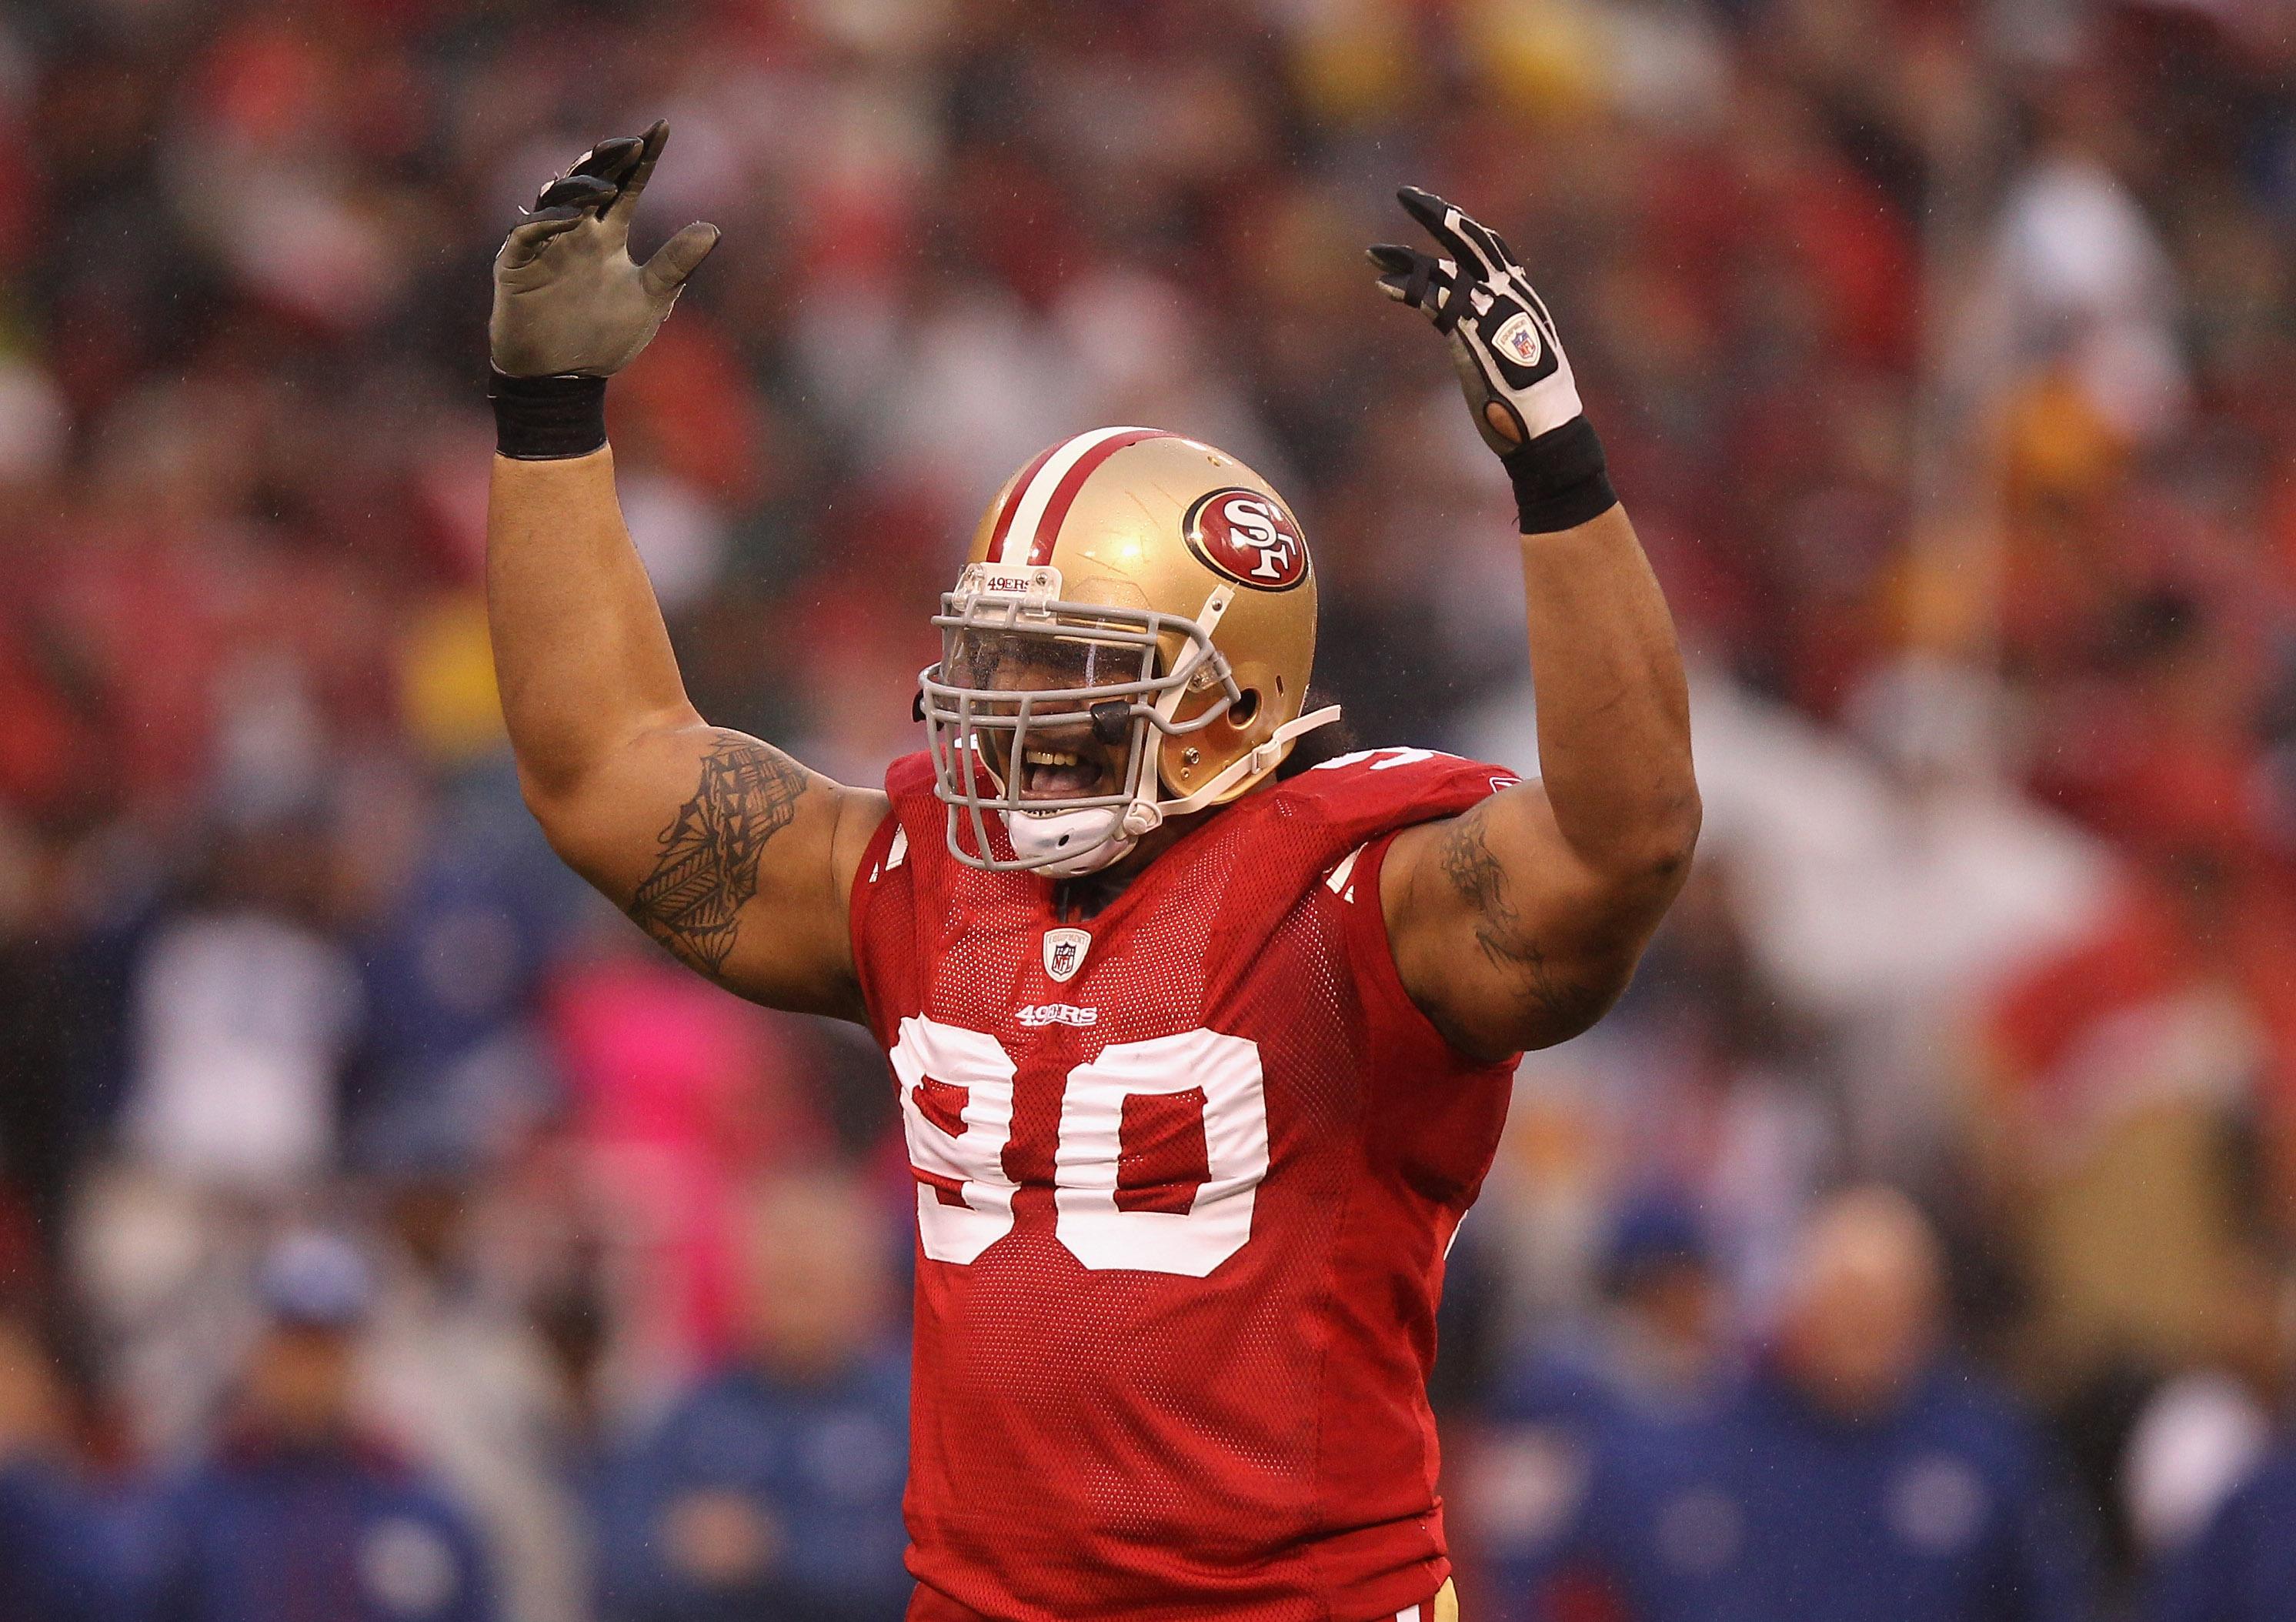 Isaac Sopoaga #90 of the San Francisco 49ers reacts against the New York Giants